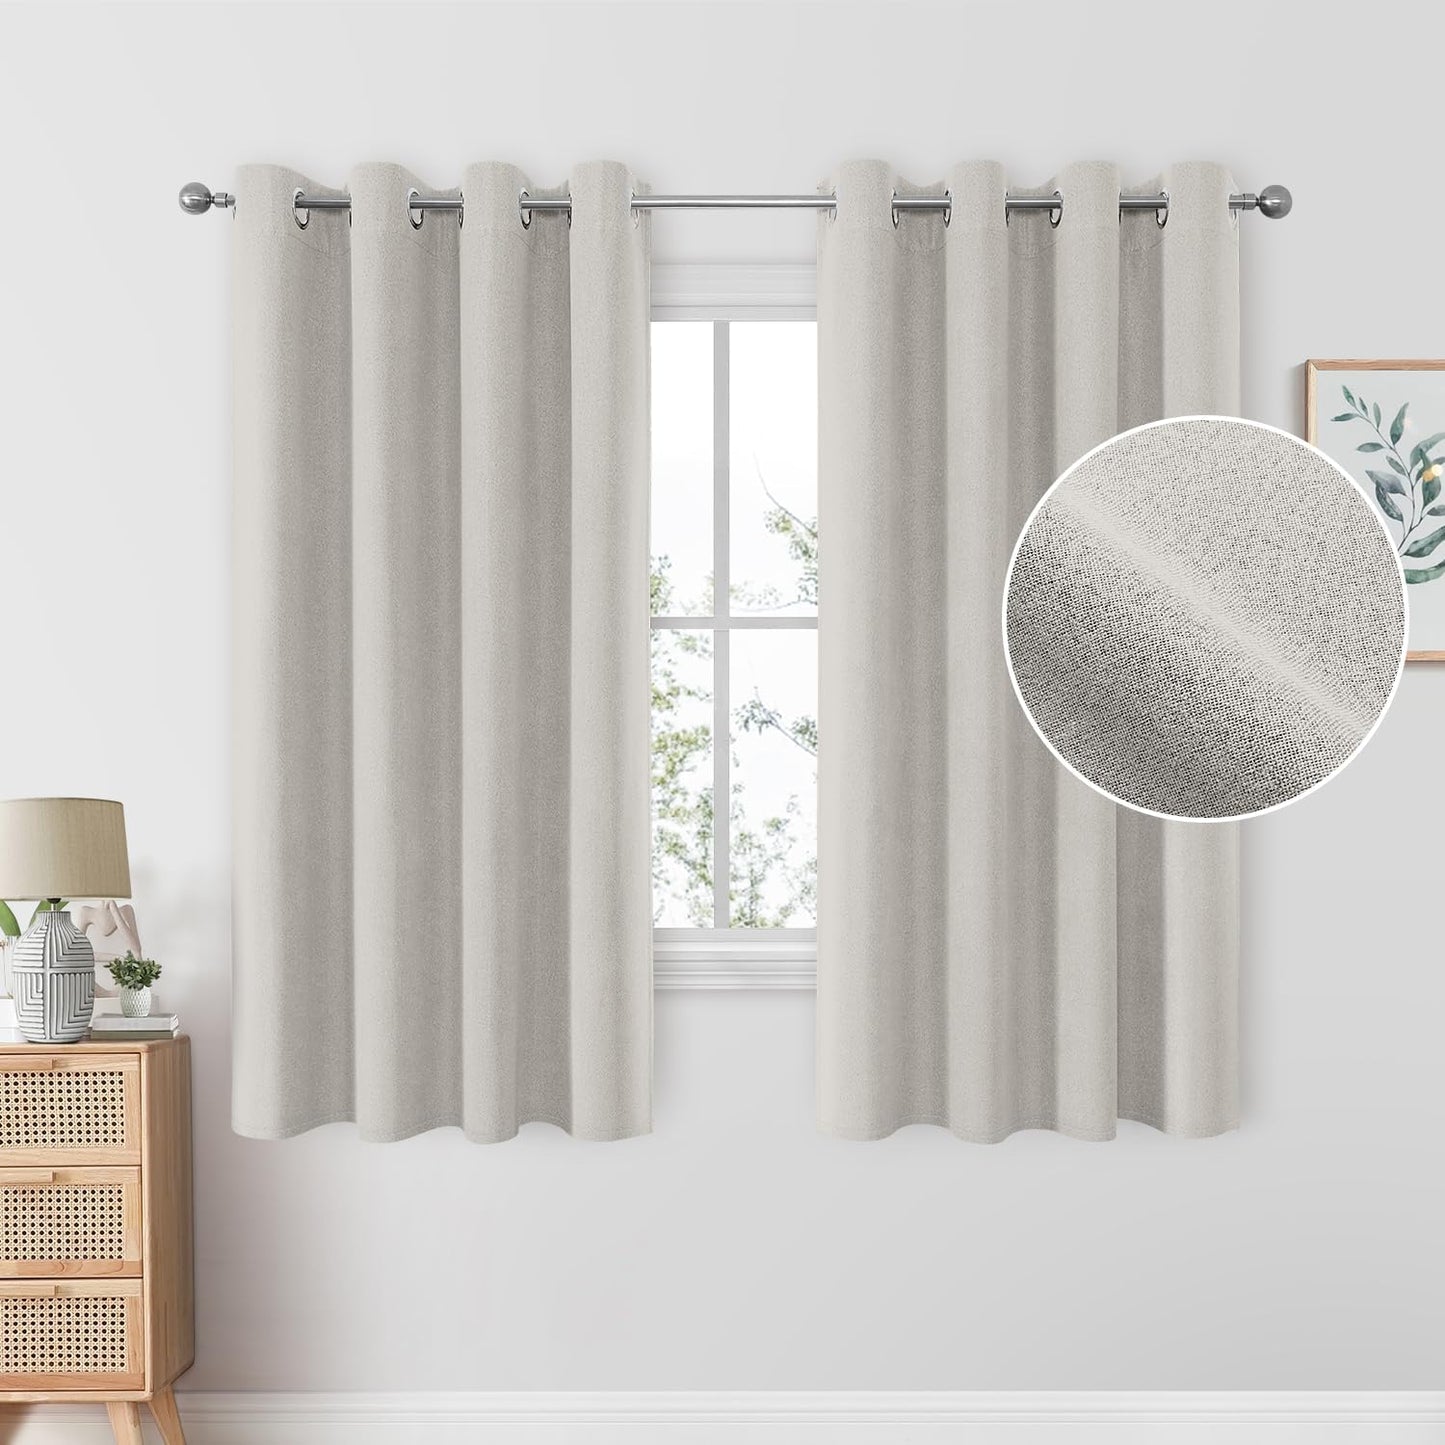 HOMEIDEAS 100% Blush Pink Linen Blackout Curtains for Bedroom, 52 X 84 Inch Room Darkening Curtains for Living, Faux Linen Thermal Insulated Full Black Out Grommet Window Curtains/Drapes  HOMEIDEAS Light Beige W52" X L63" 